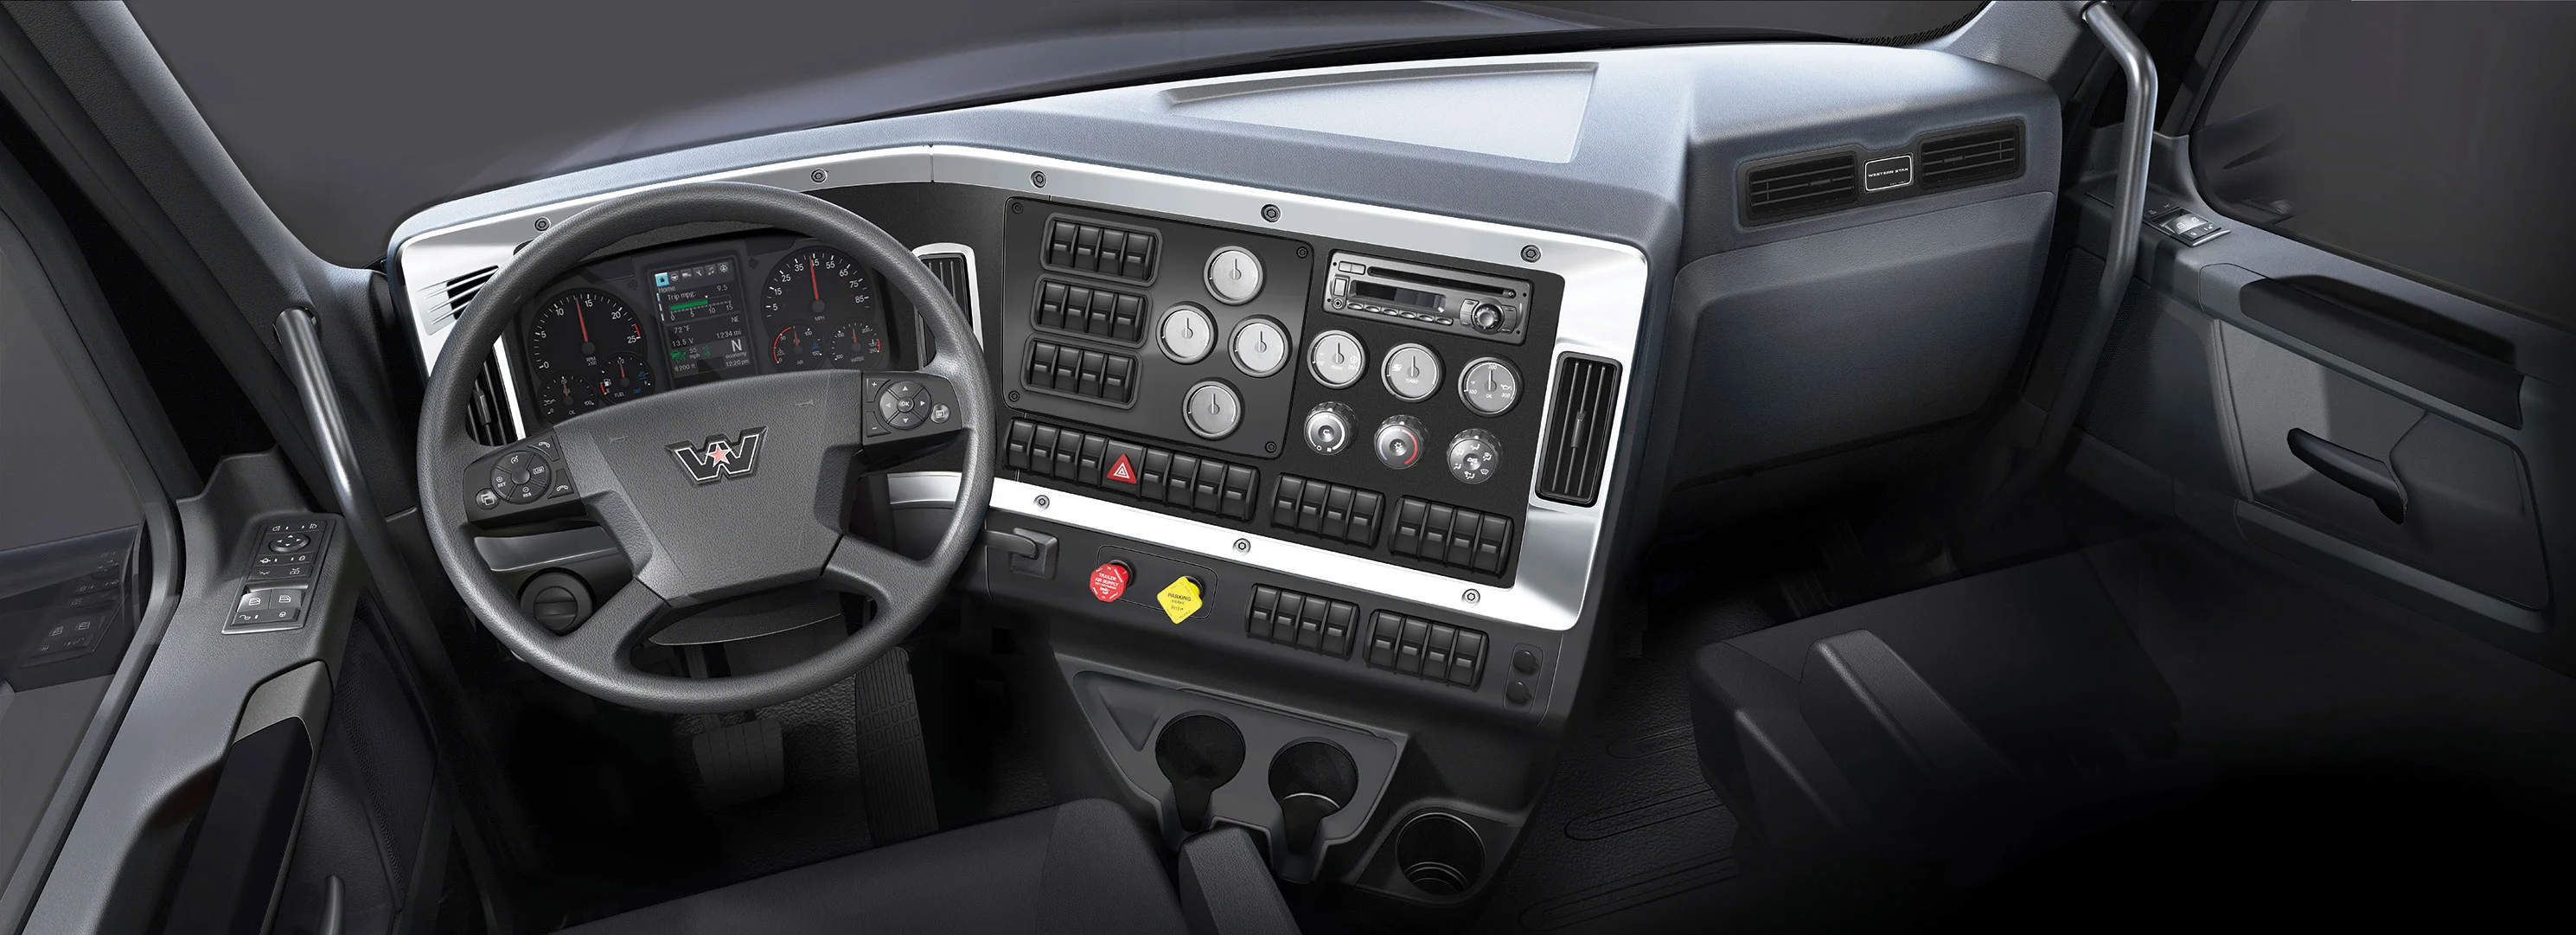 Western Star X Series Interior Dashboard View with Charcoal Black Finish